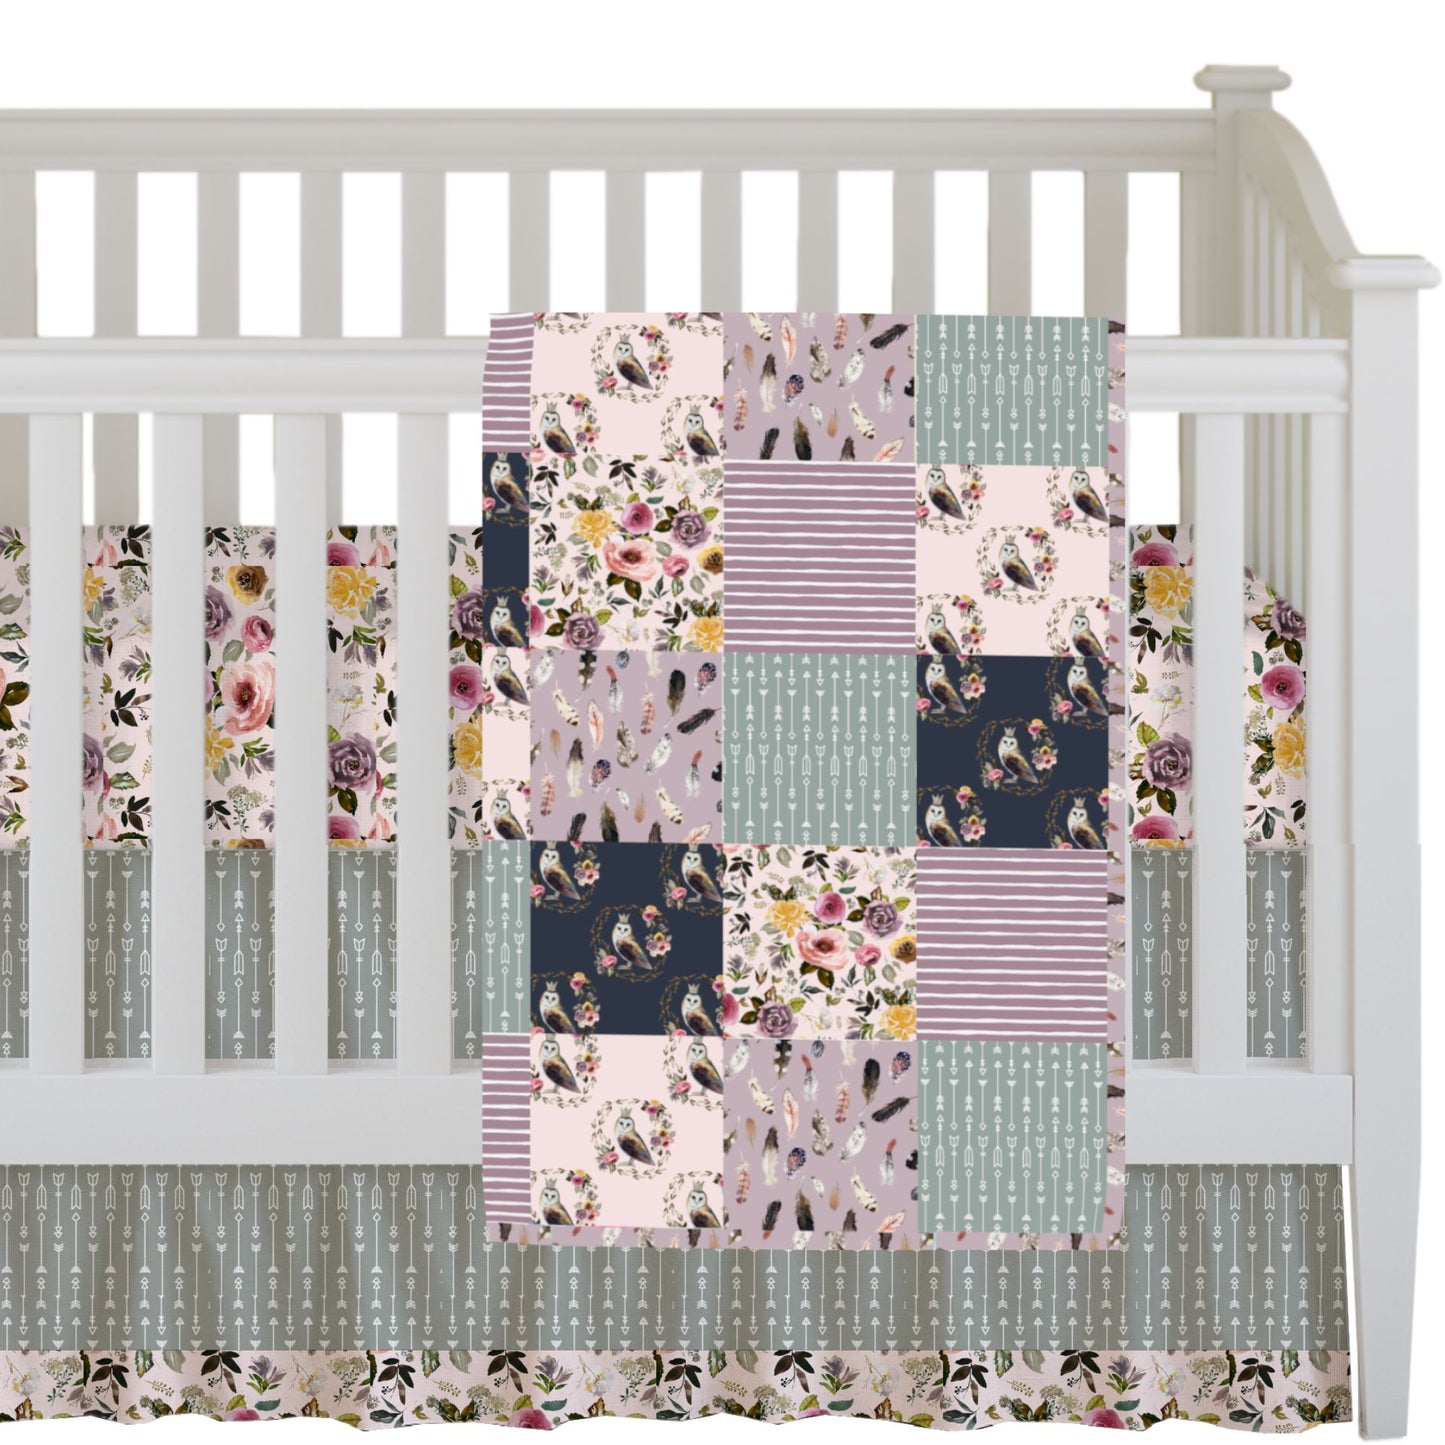 Cambridge Owls in Soft Blush and Sage Patchwork Quilt